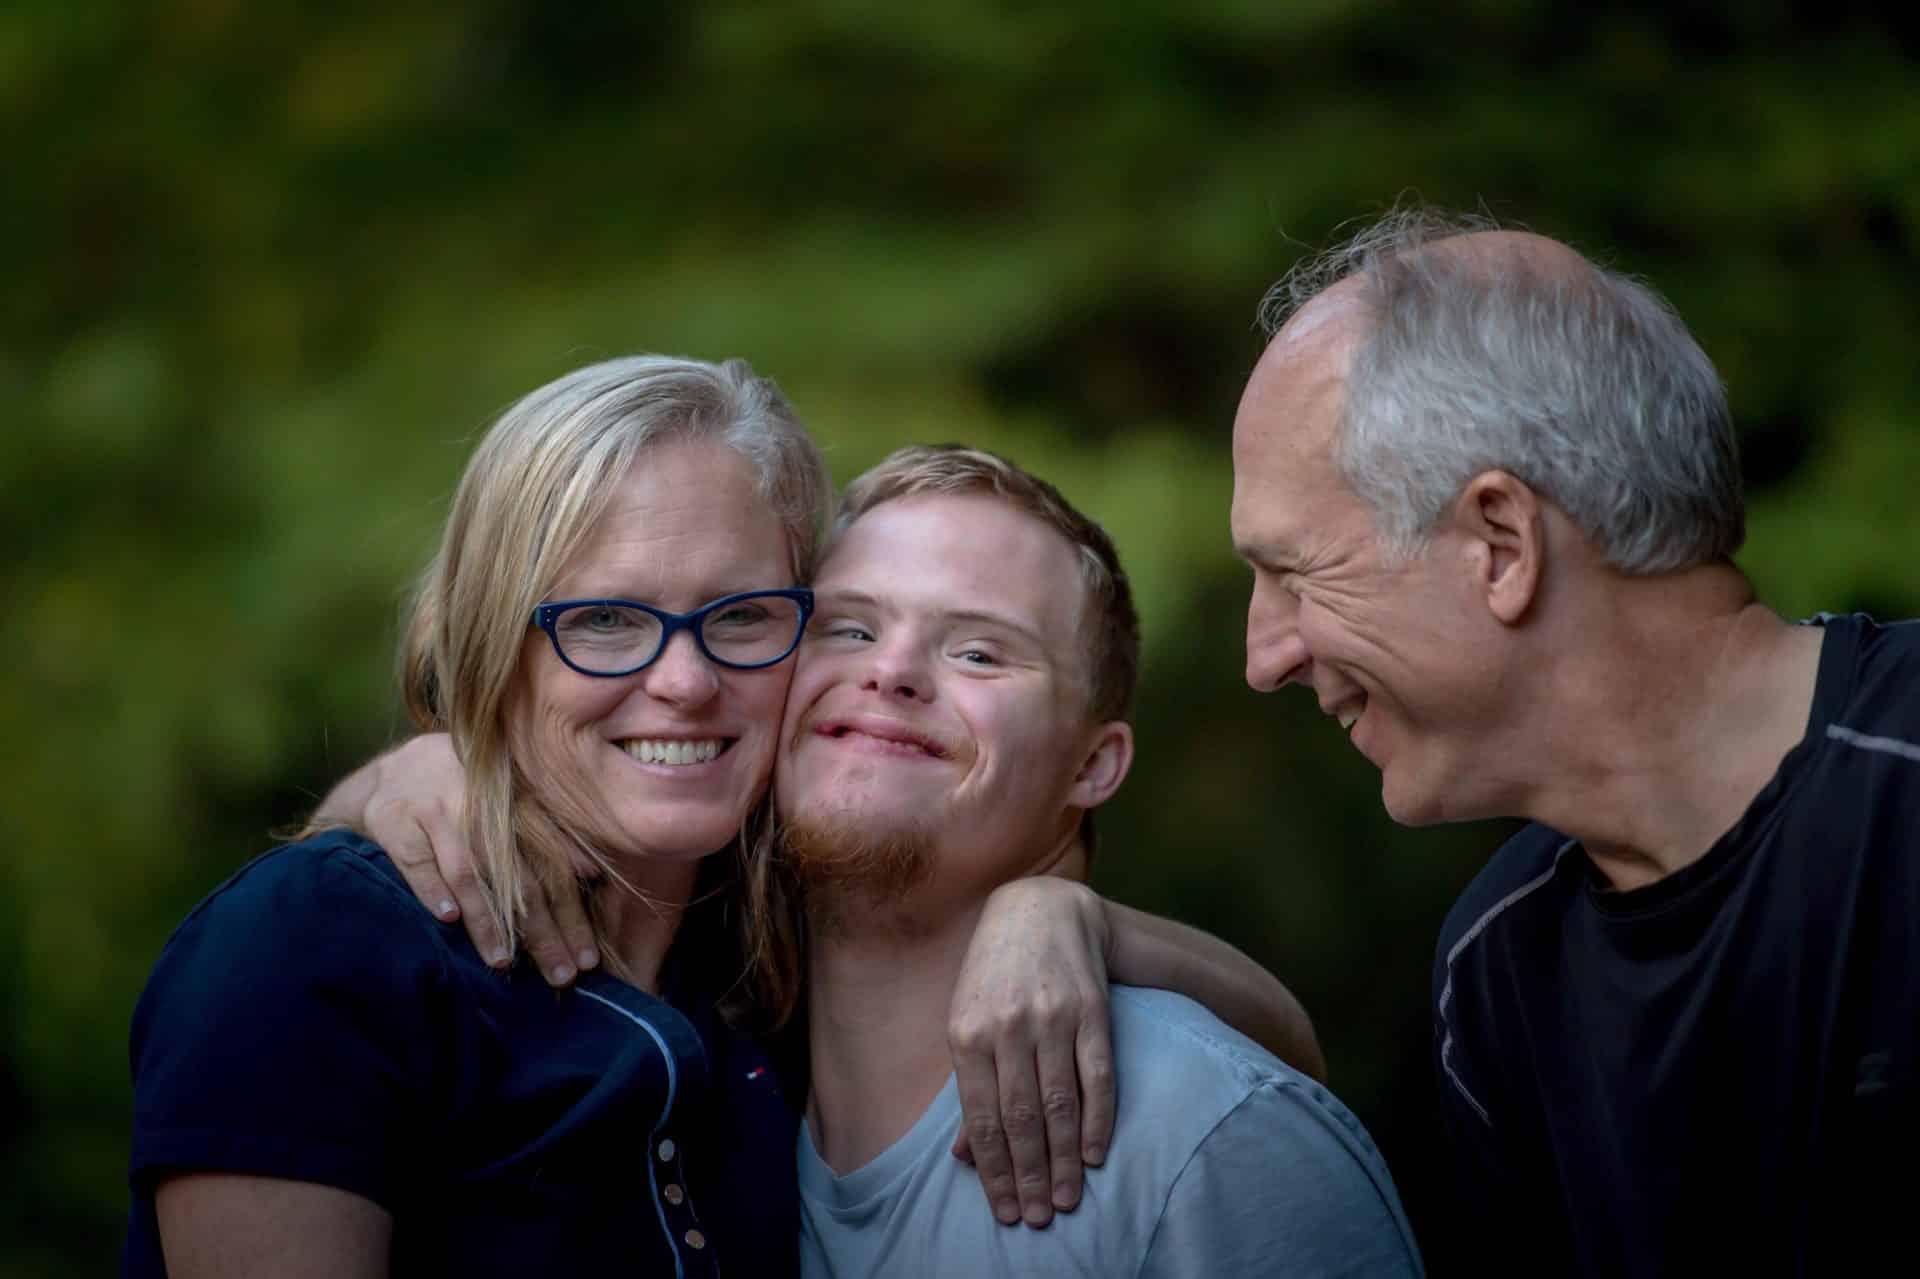 Two parents smile for photos with their son who has down-syndrome